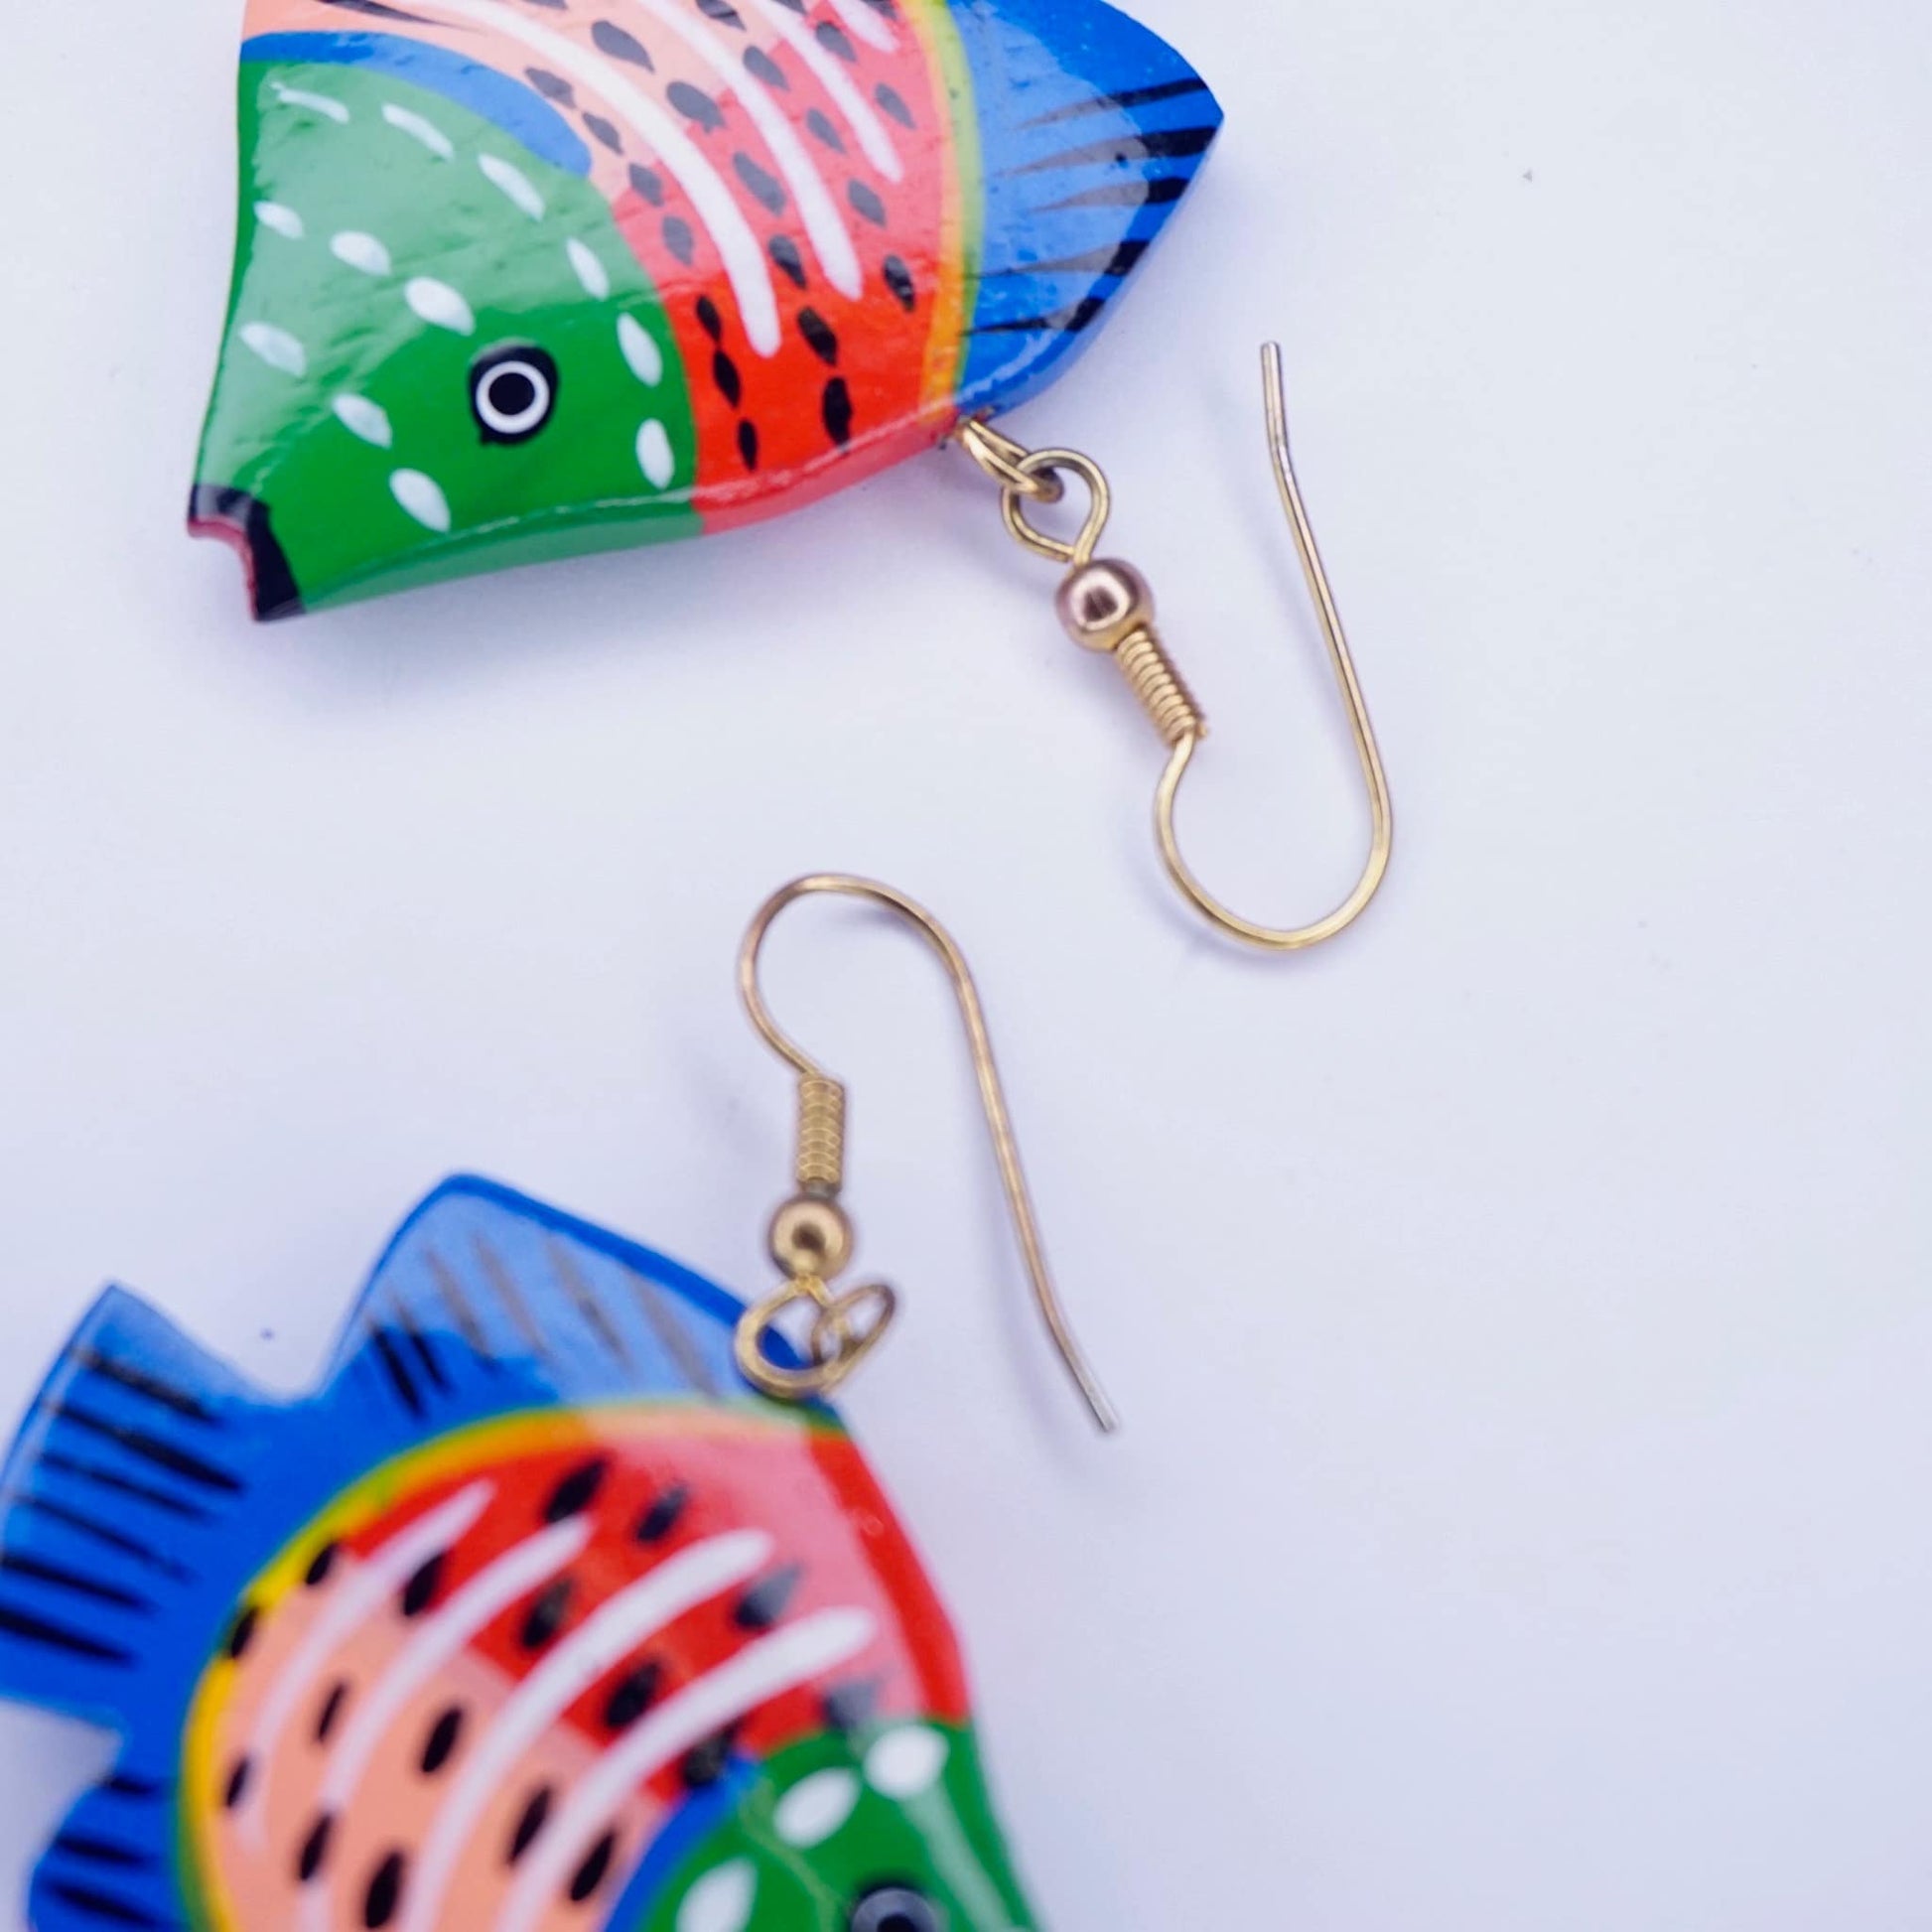 Vintage Wood Carved Fish Earrings, Colorful Painted Wood Dangle Earrings with Gold Hooks, Handmade Wooden Statement Earrings on White Background